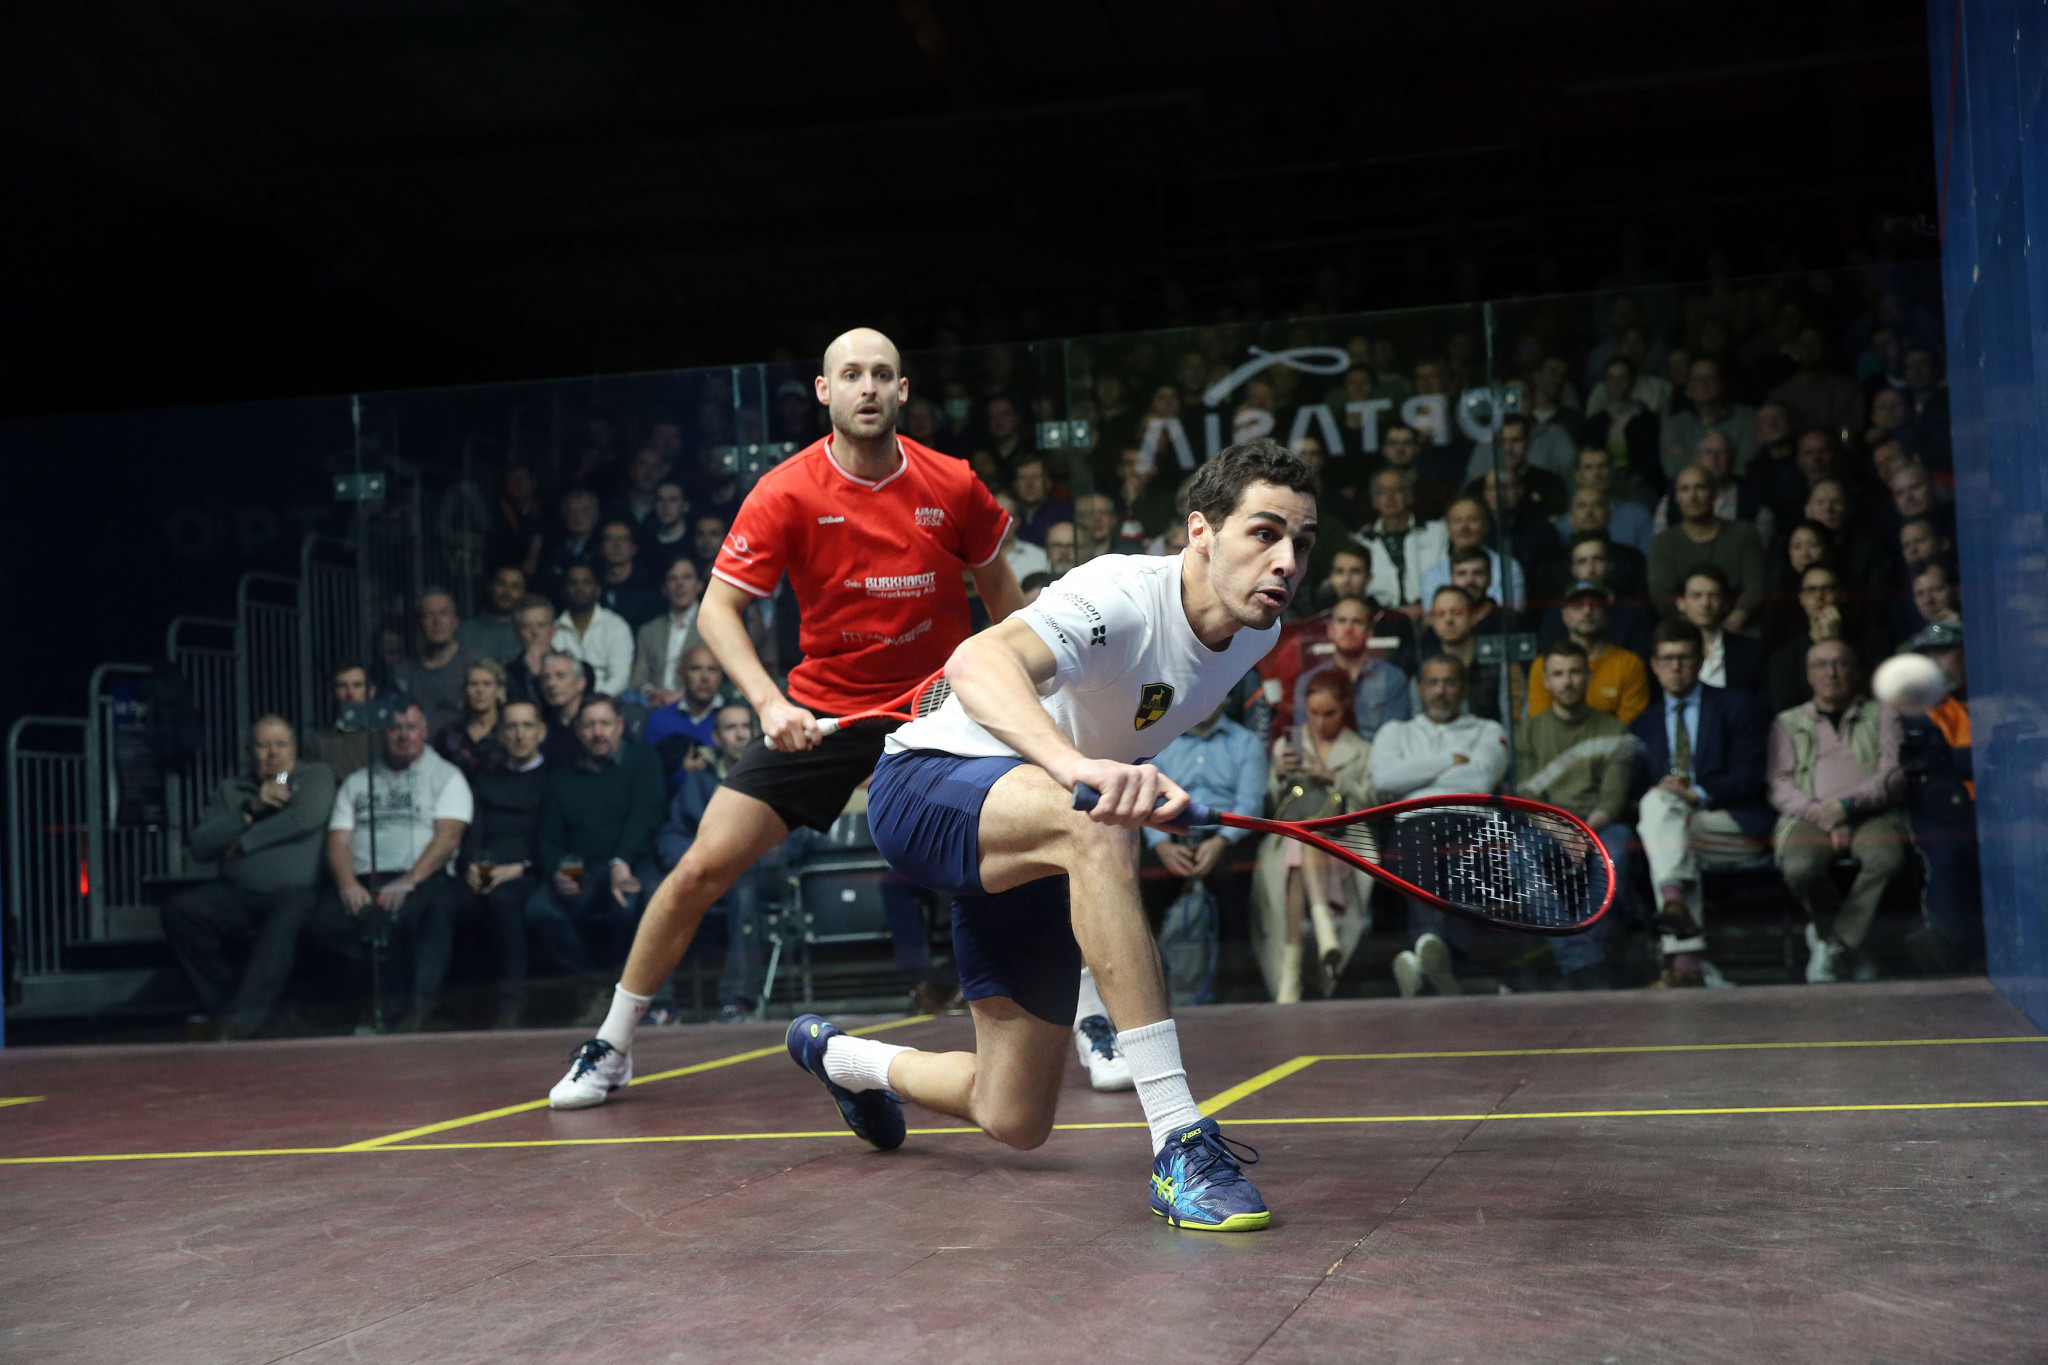 Top seed Ali Farag ended the run of unseeded Nicolas Mueller as he reached the PSA Optasia Championship final ©PSA World Tour